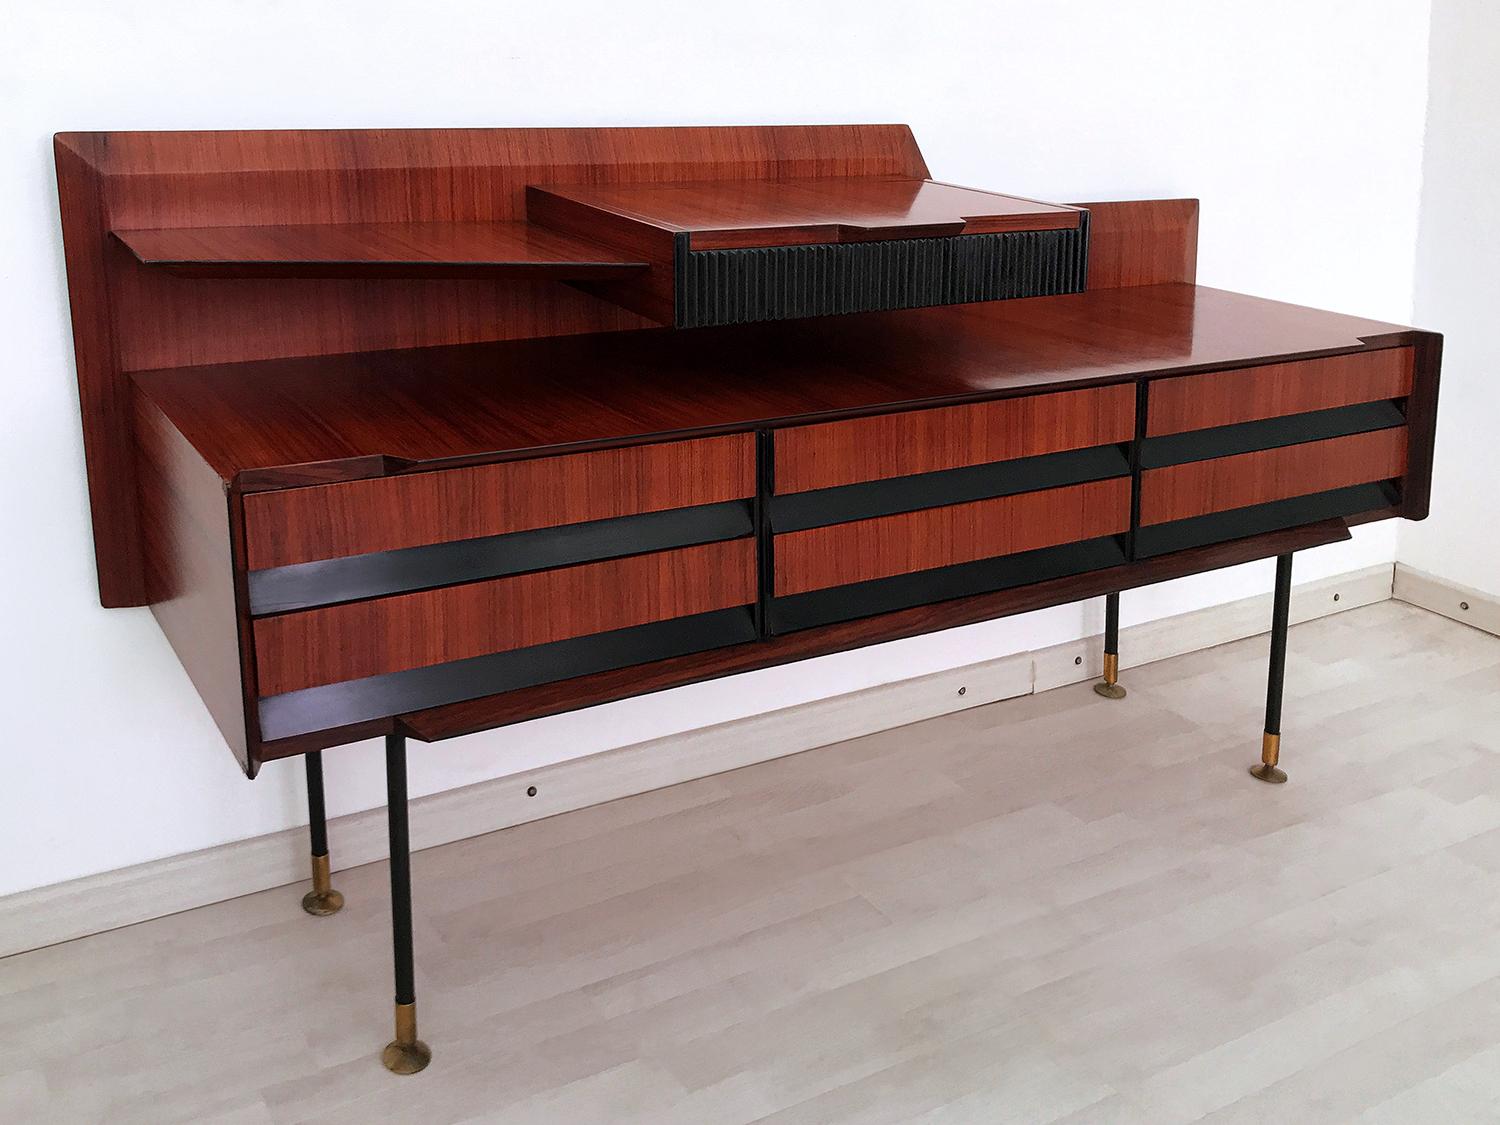 Italian Mid-Century Teak Wood Sideboard with Drawers by Vittorio Dassi, 1950s 8